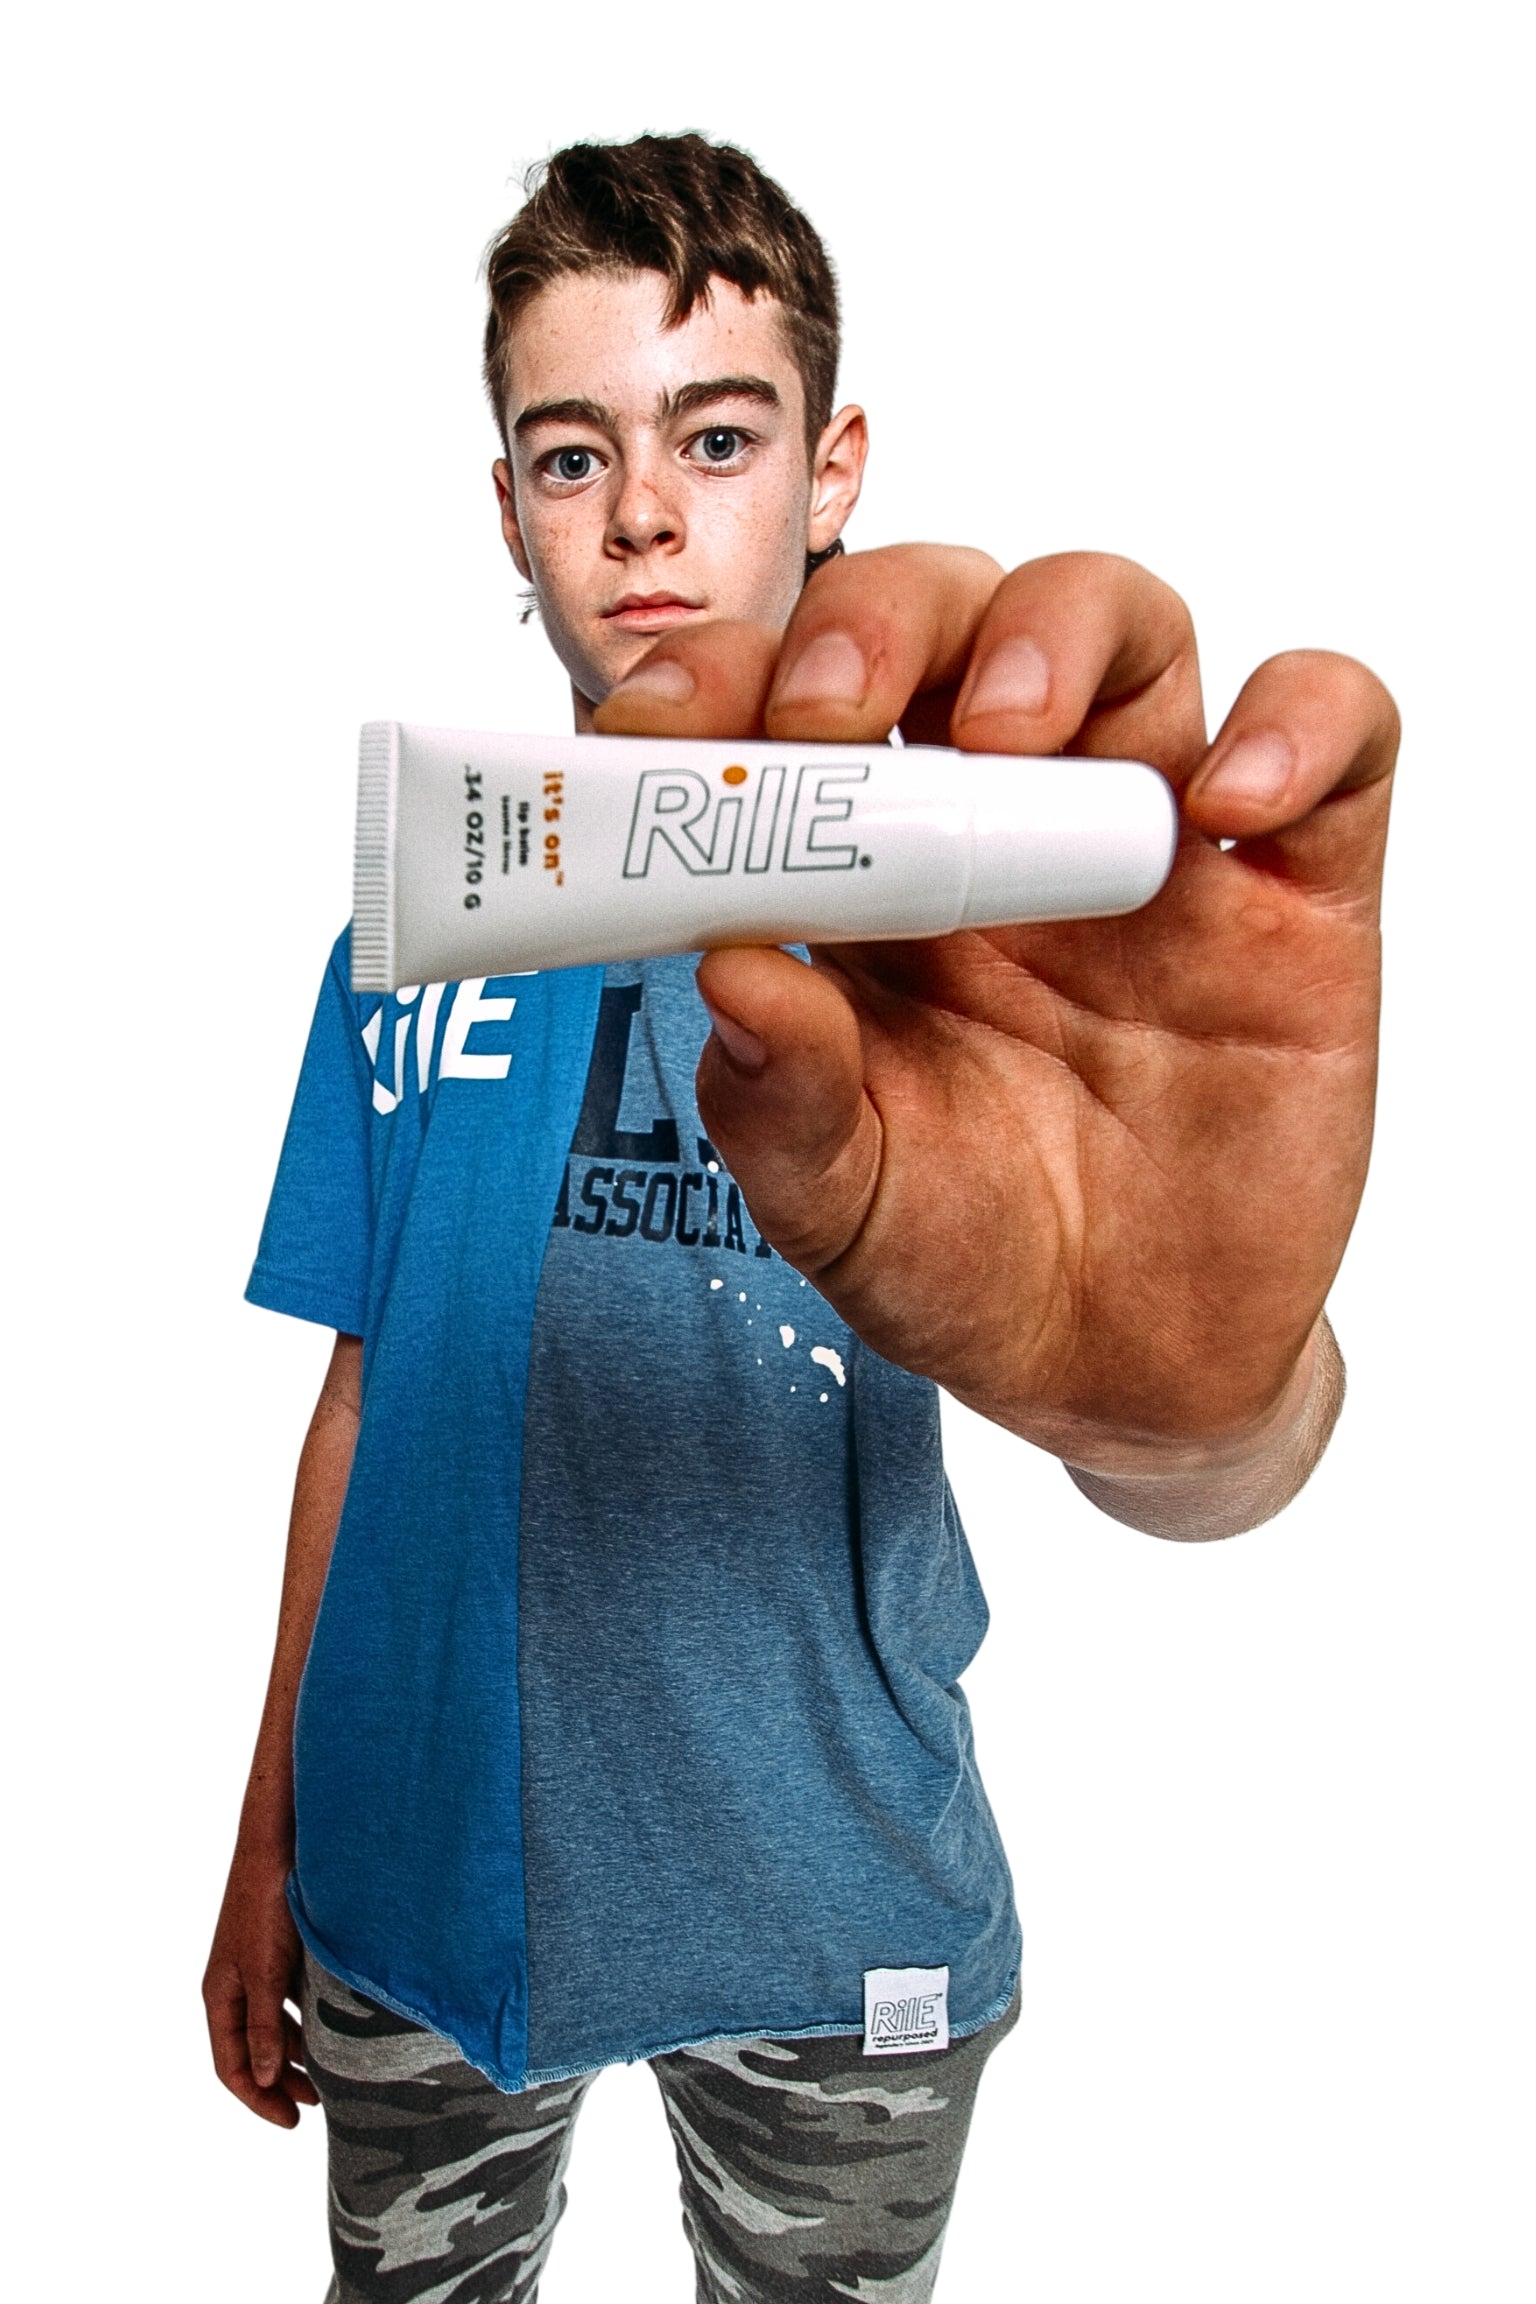 A young teen or tween holding a tube of the Rile lip balm.